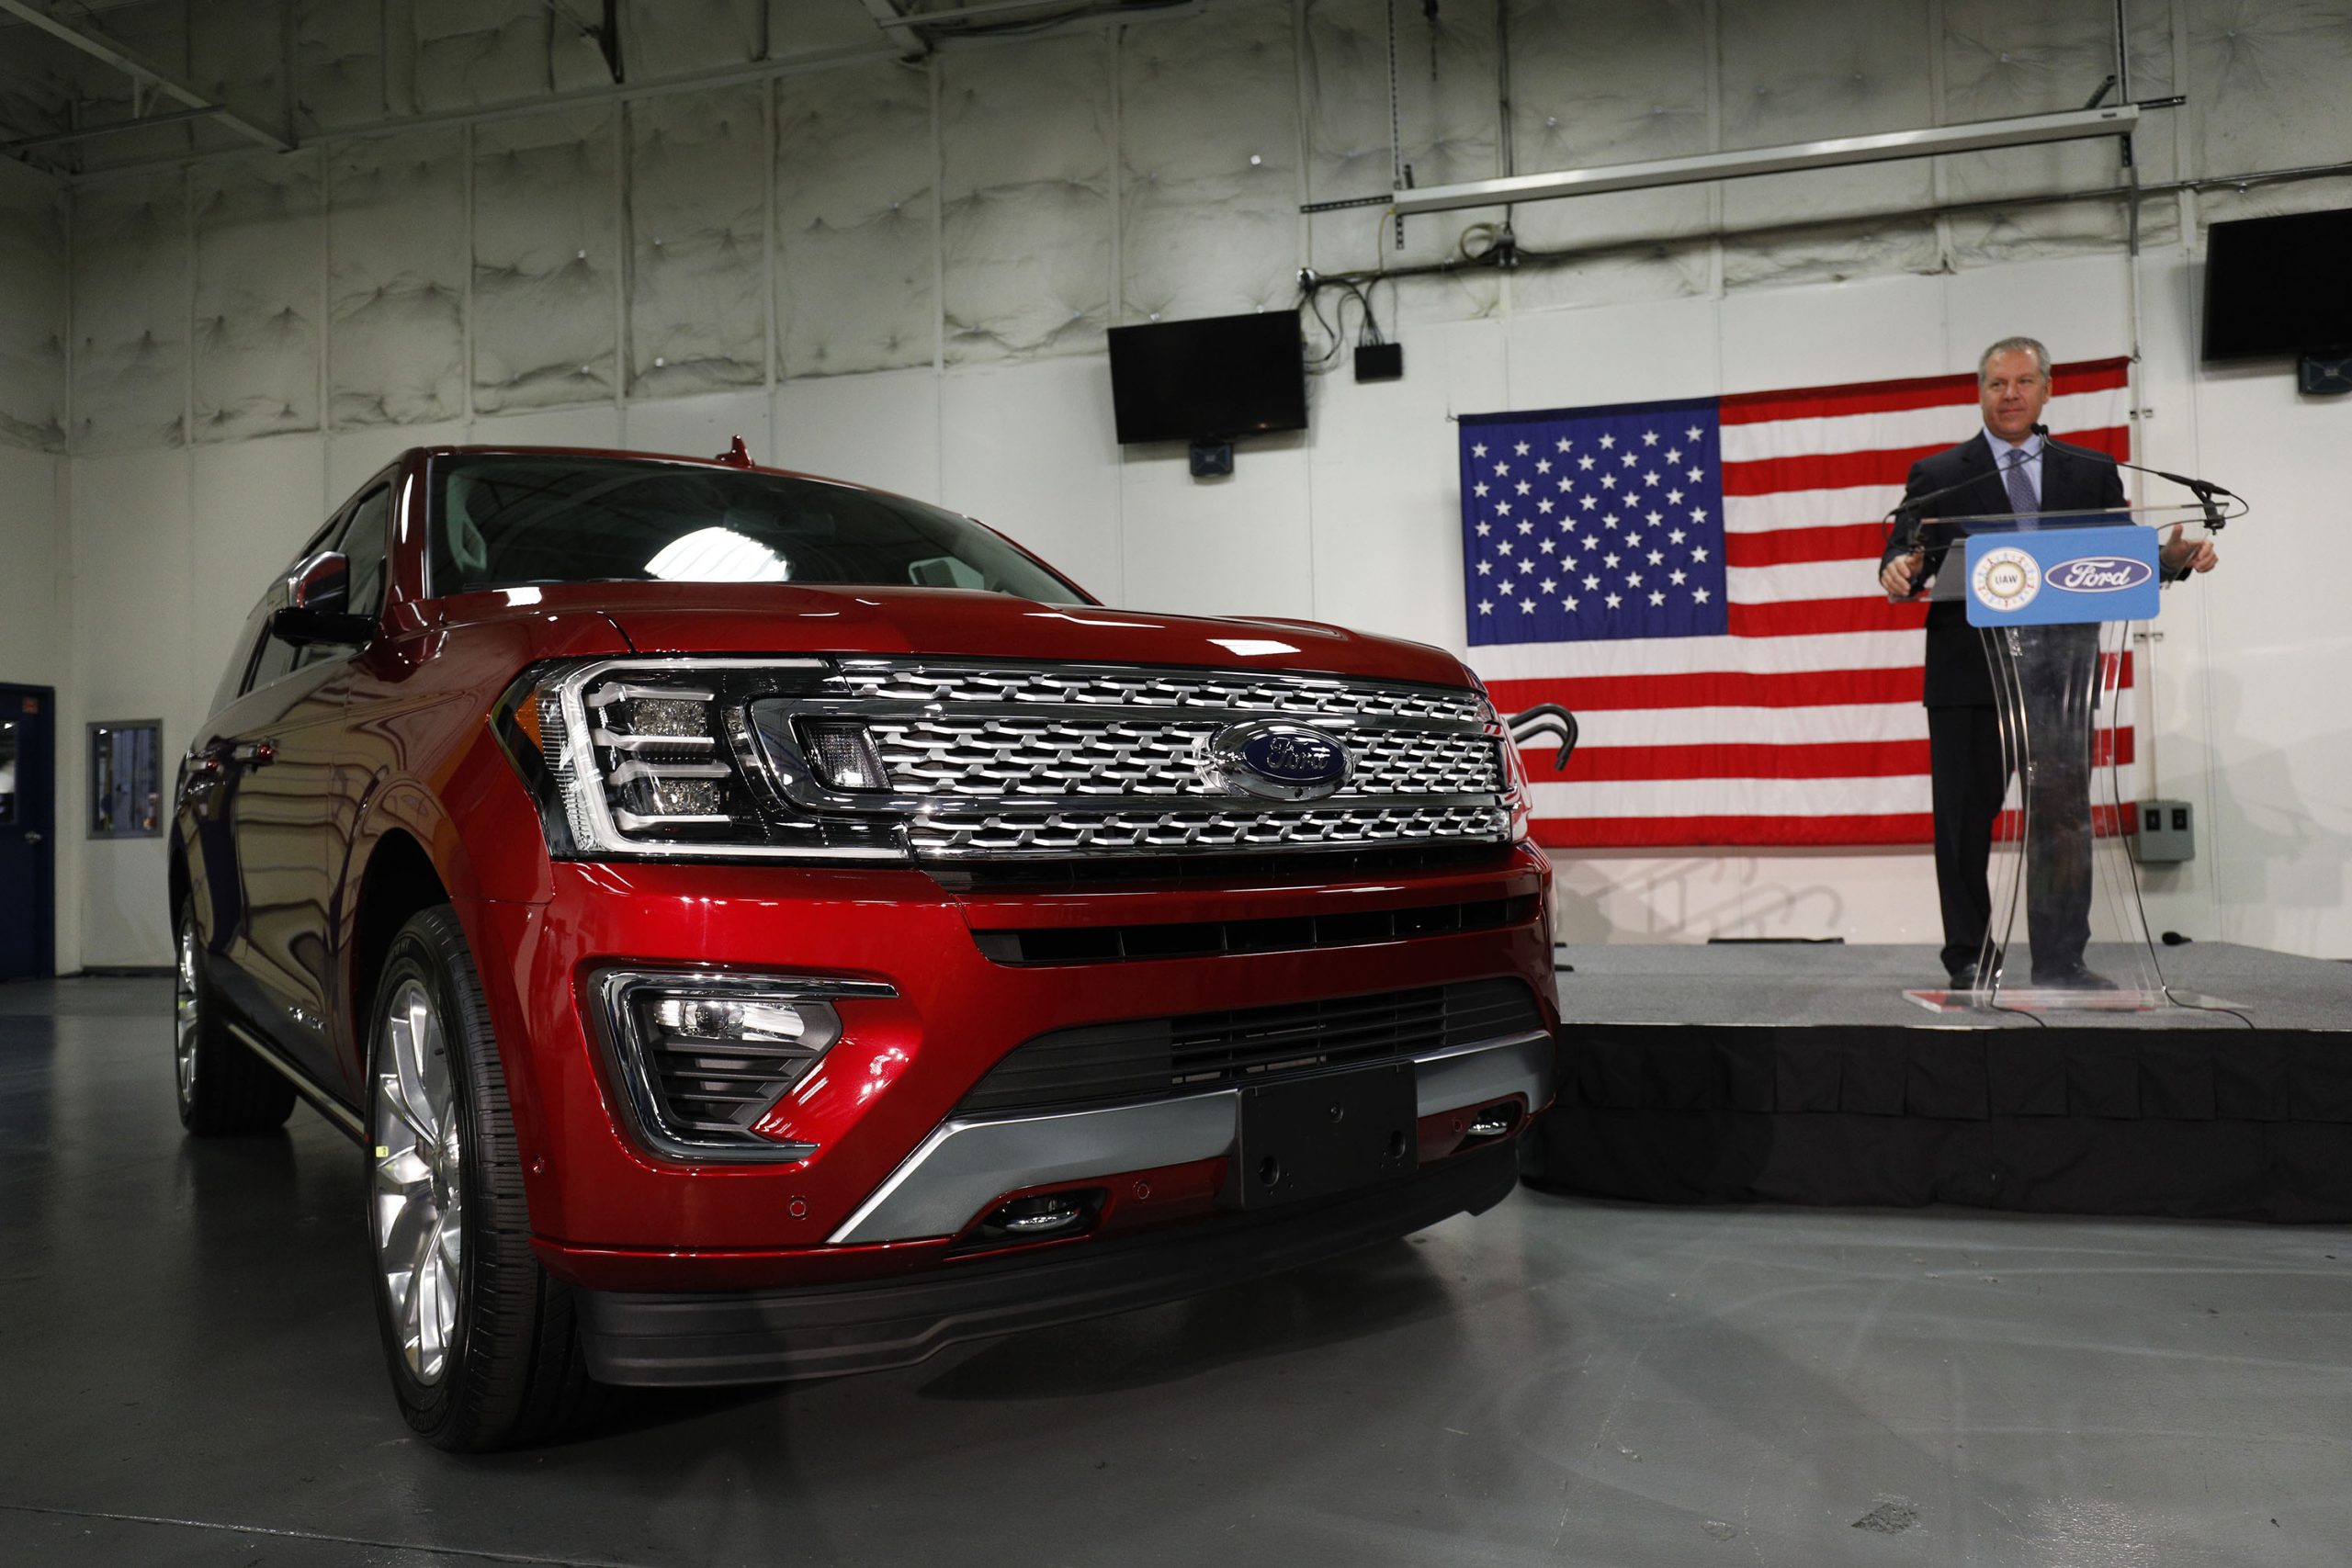 A red Ford Expedition on display